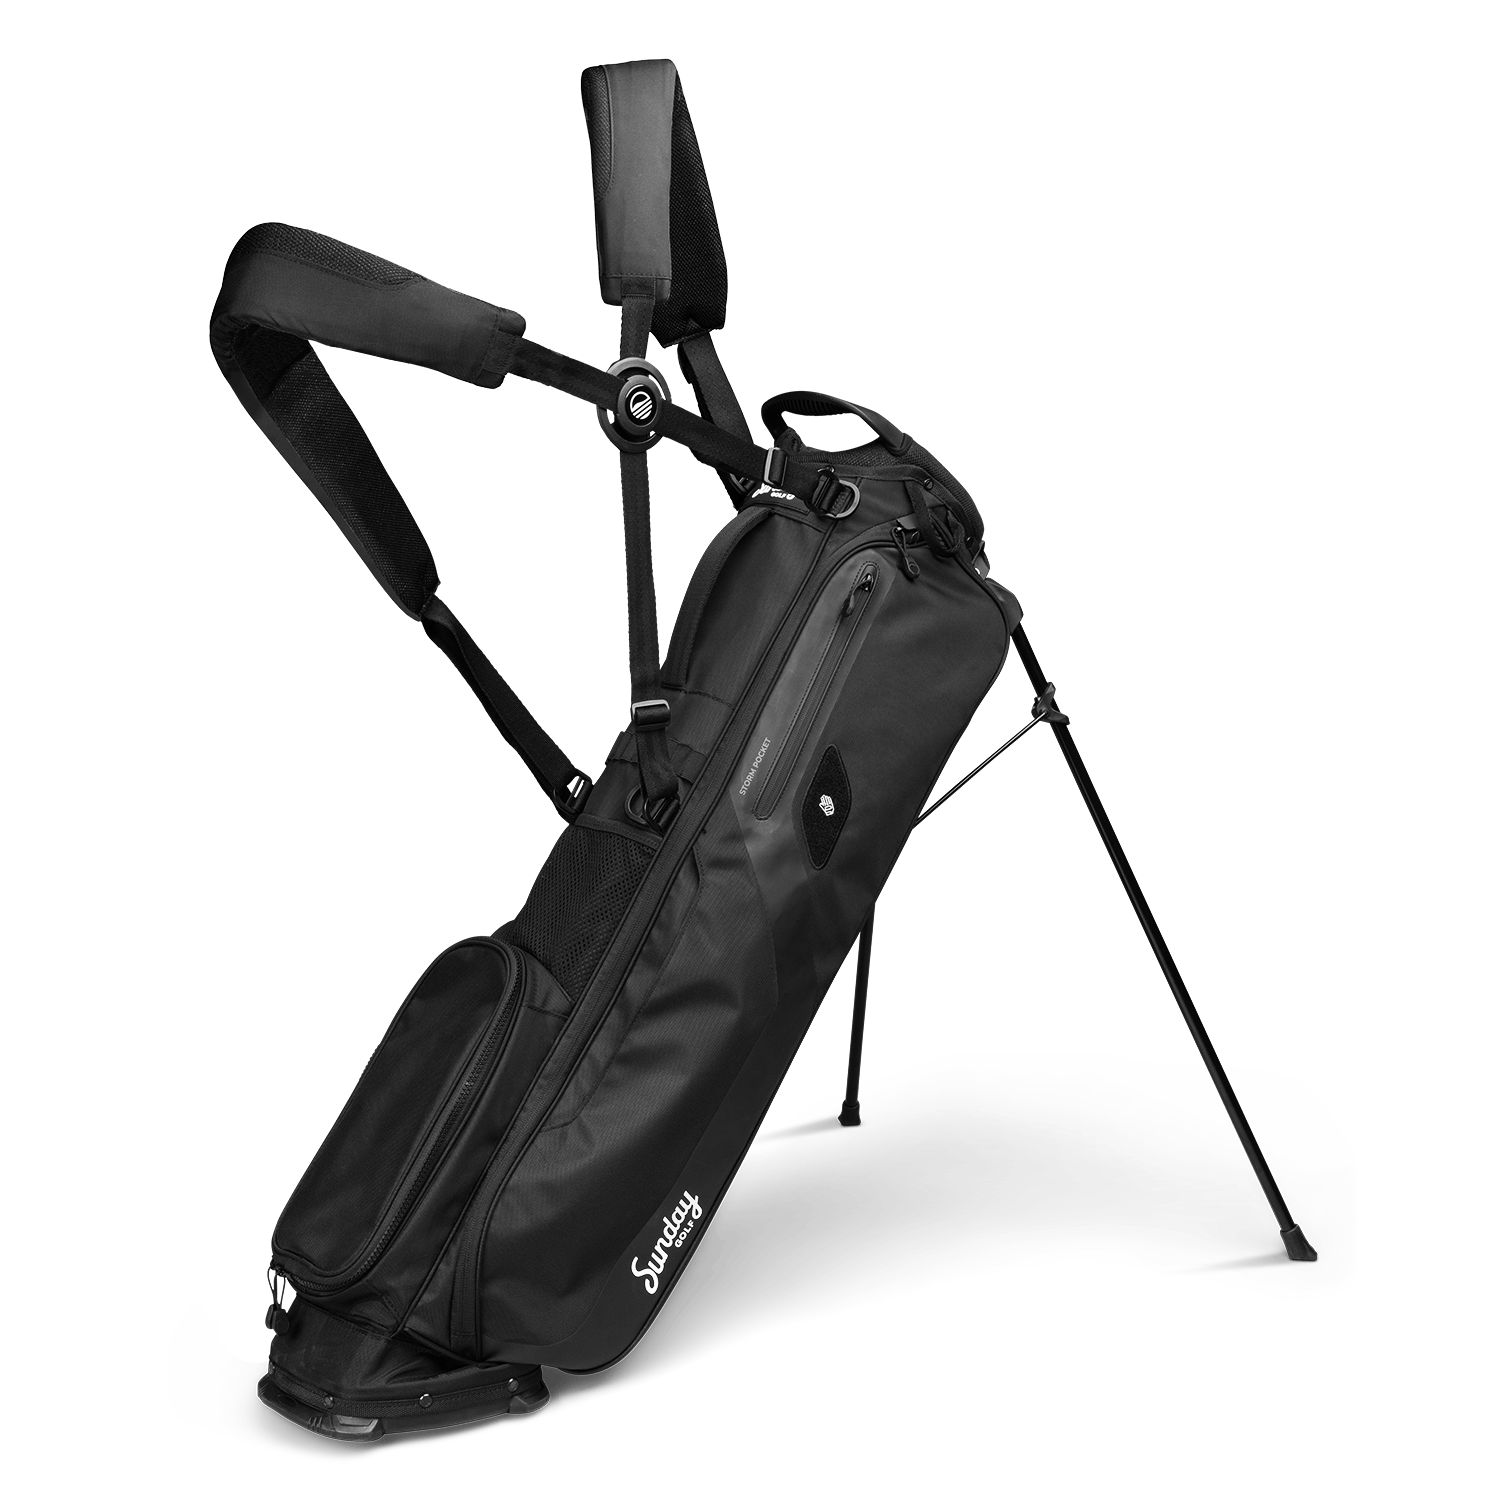 Premium Material Cart Golf Bag Embroidery Vintage Golf Bag Organizer - Buy  Premium Material Cart Golf Bag Embroidery Vintage Golf Bag Organizer  Product on